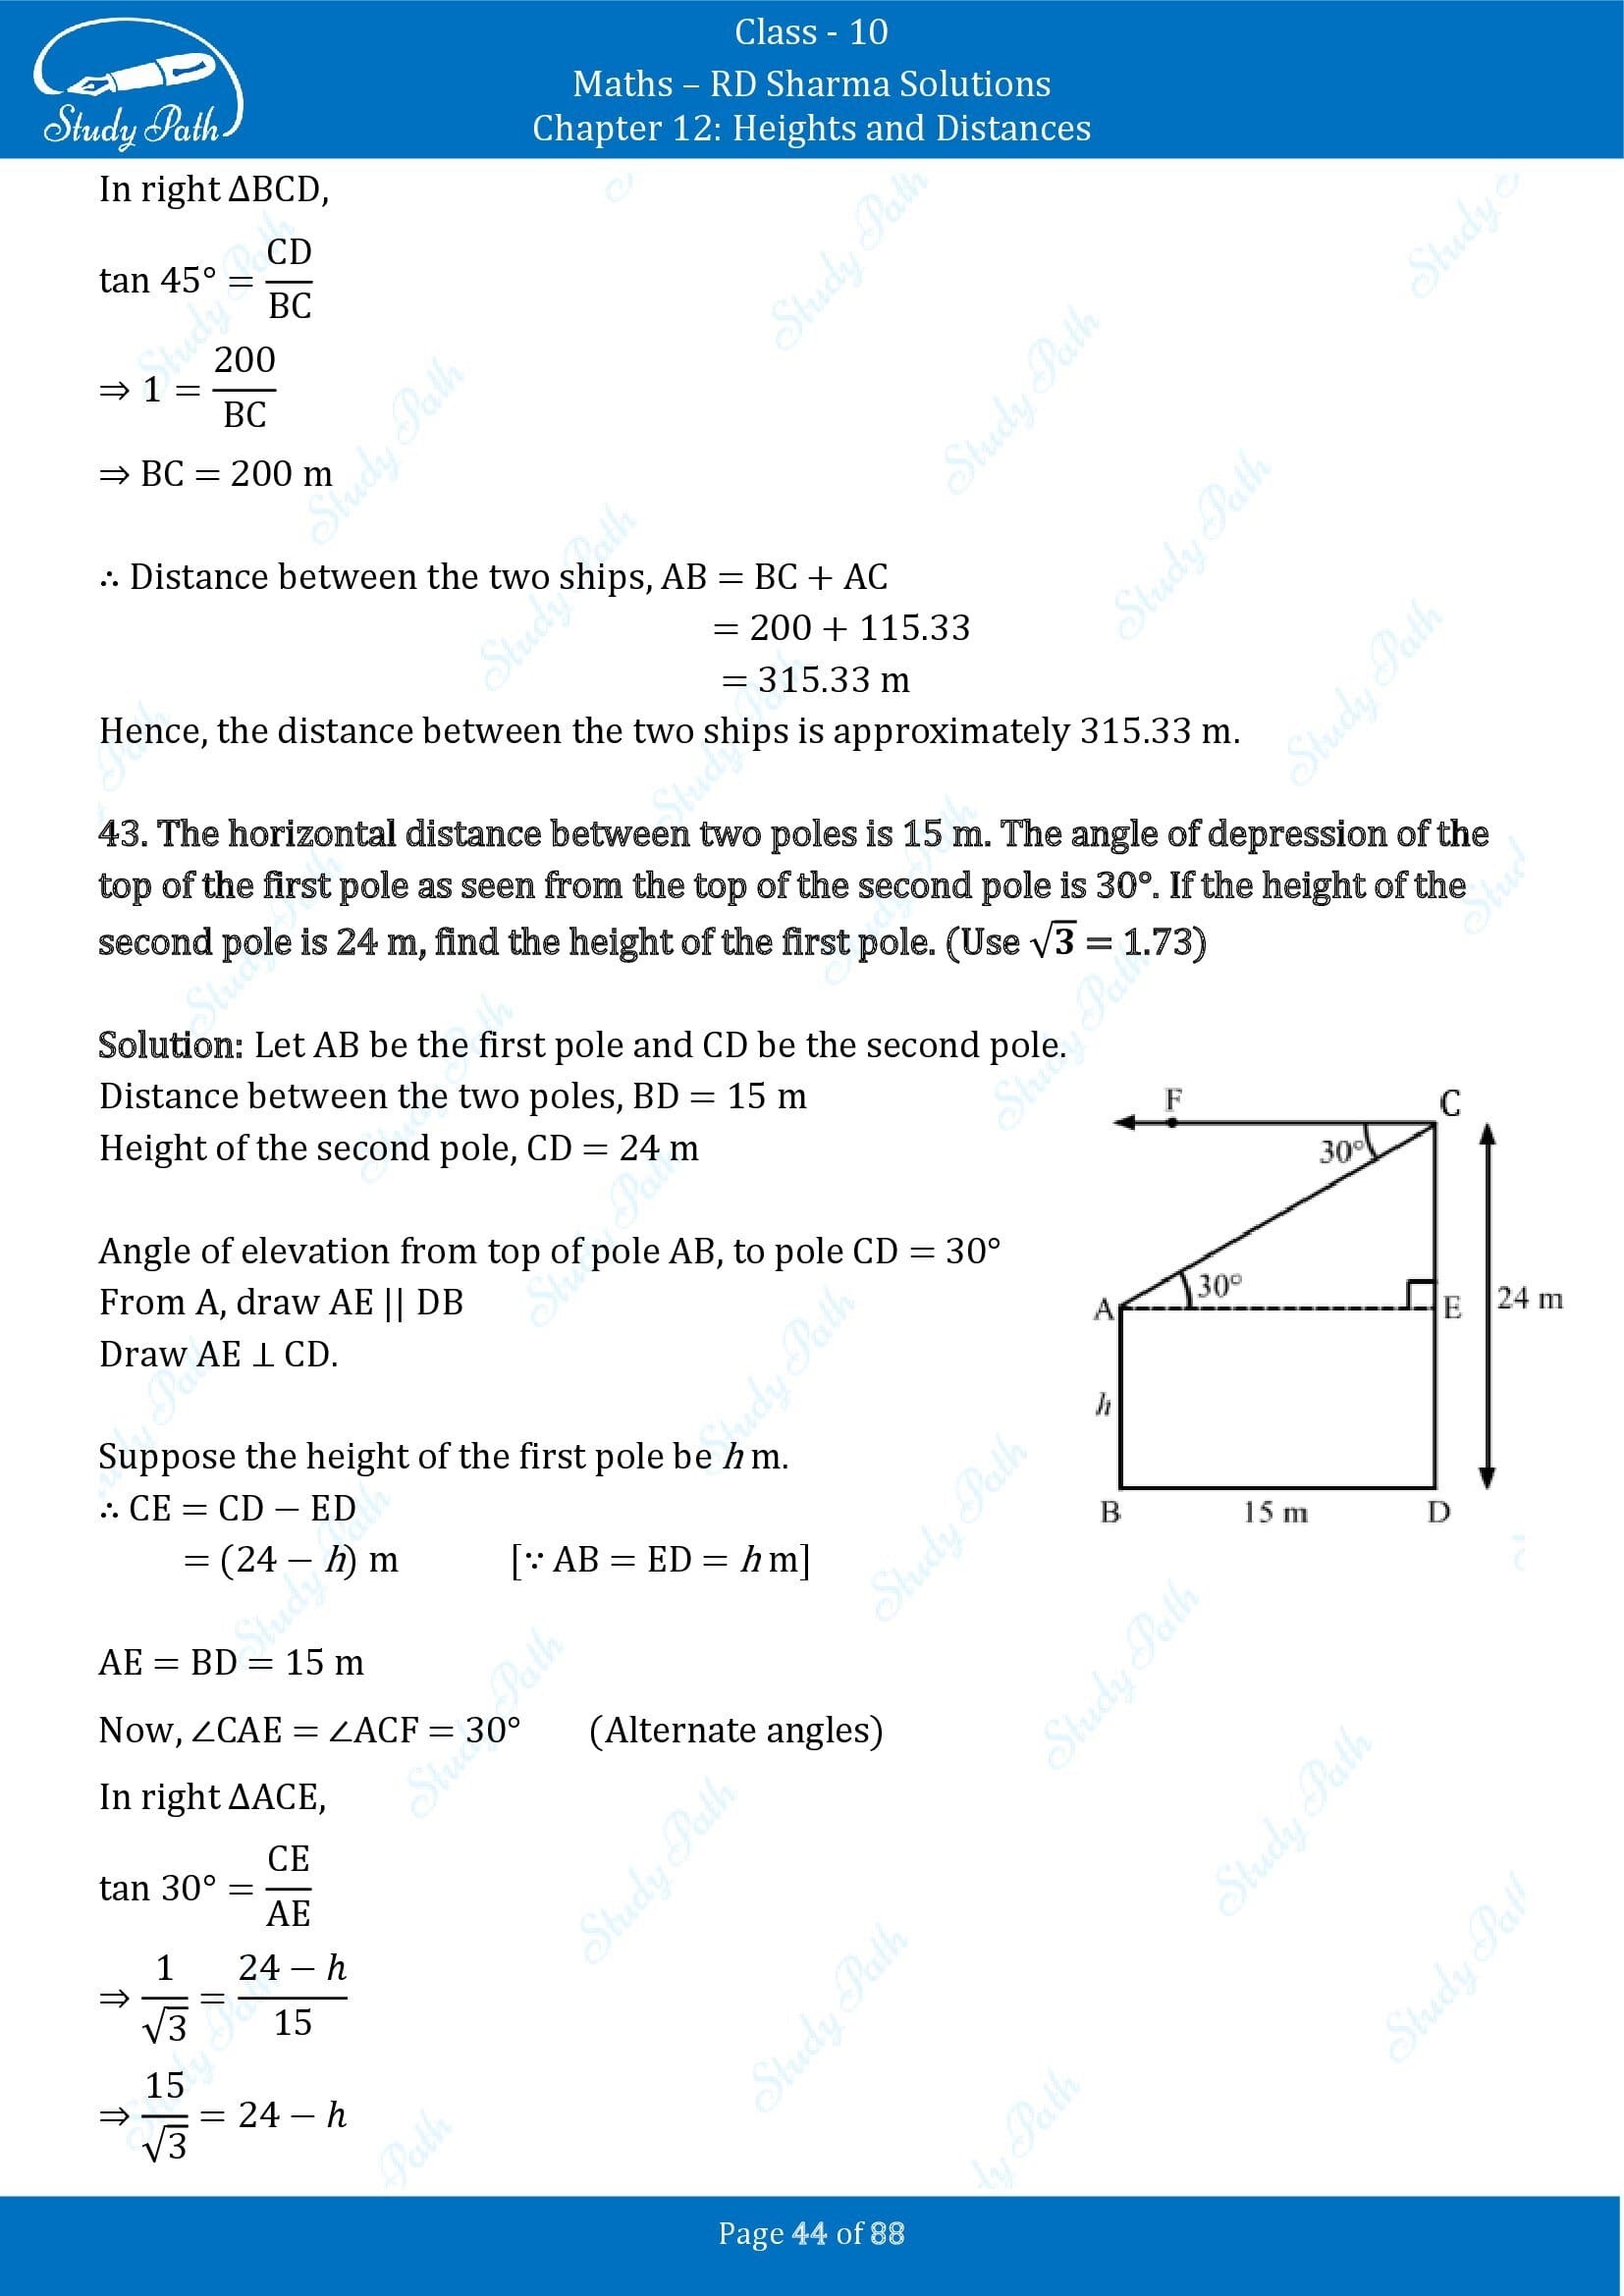 RD Sharma Solutions Class 10 Chapter 12 Heights and Distances Exercise 12.1 00044